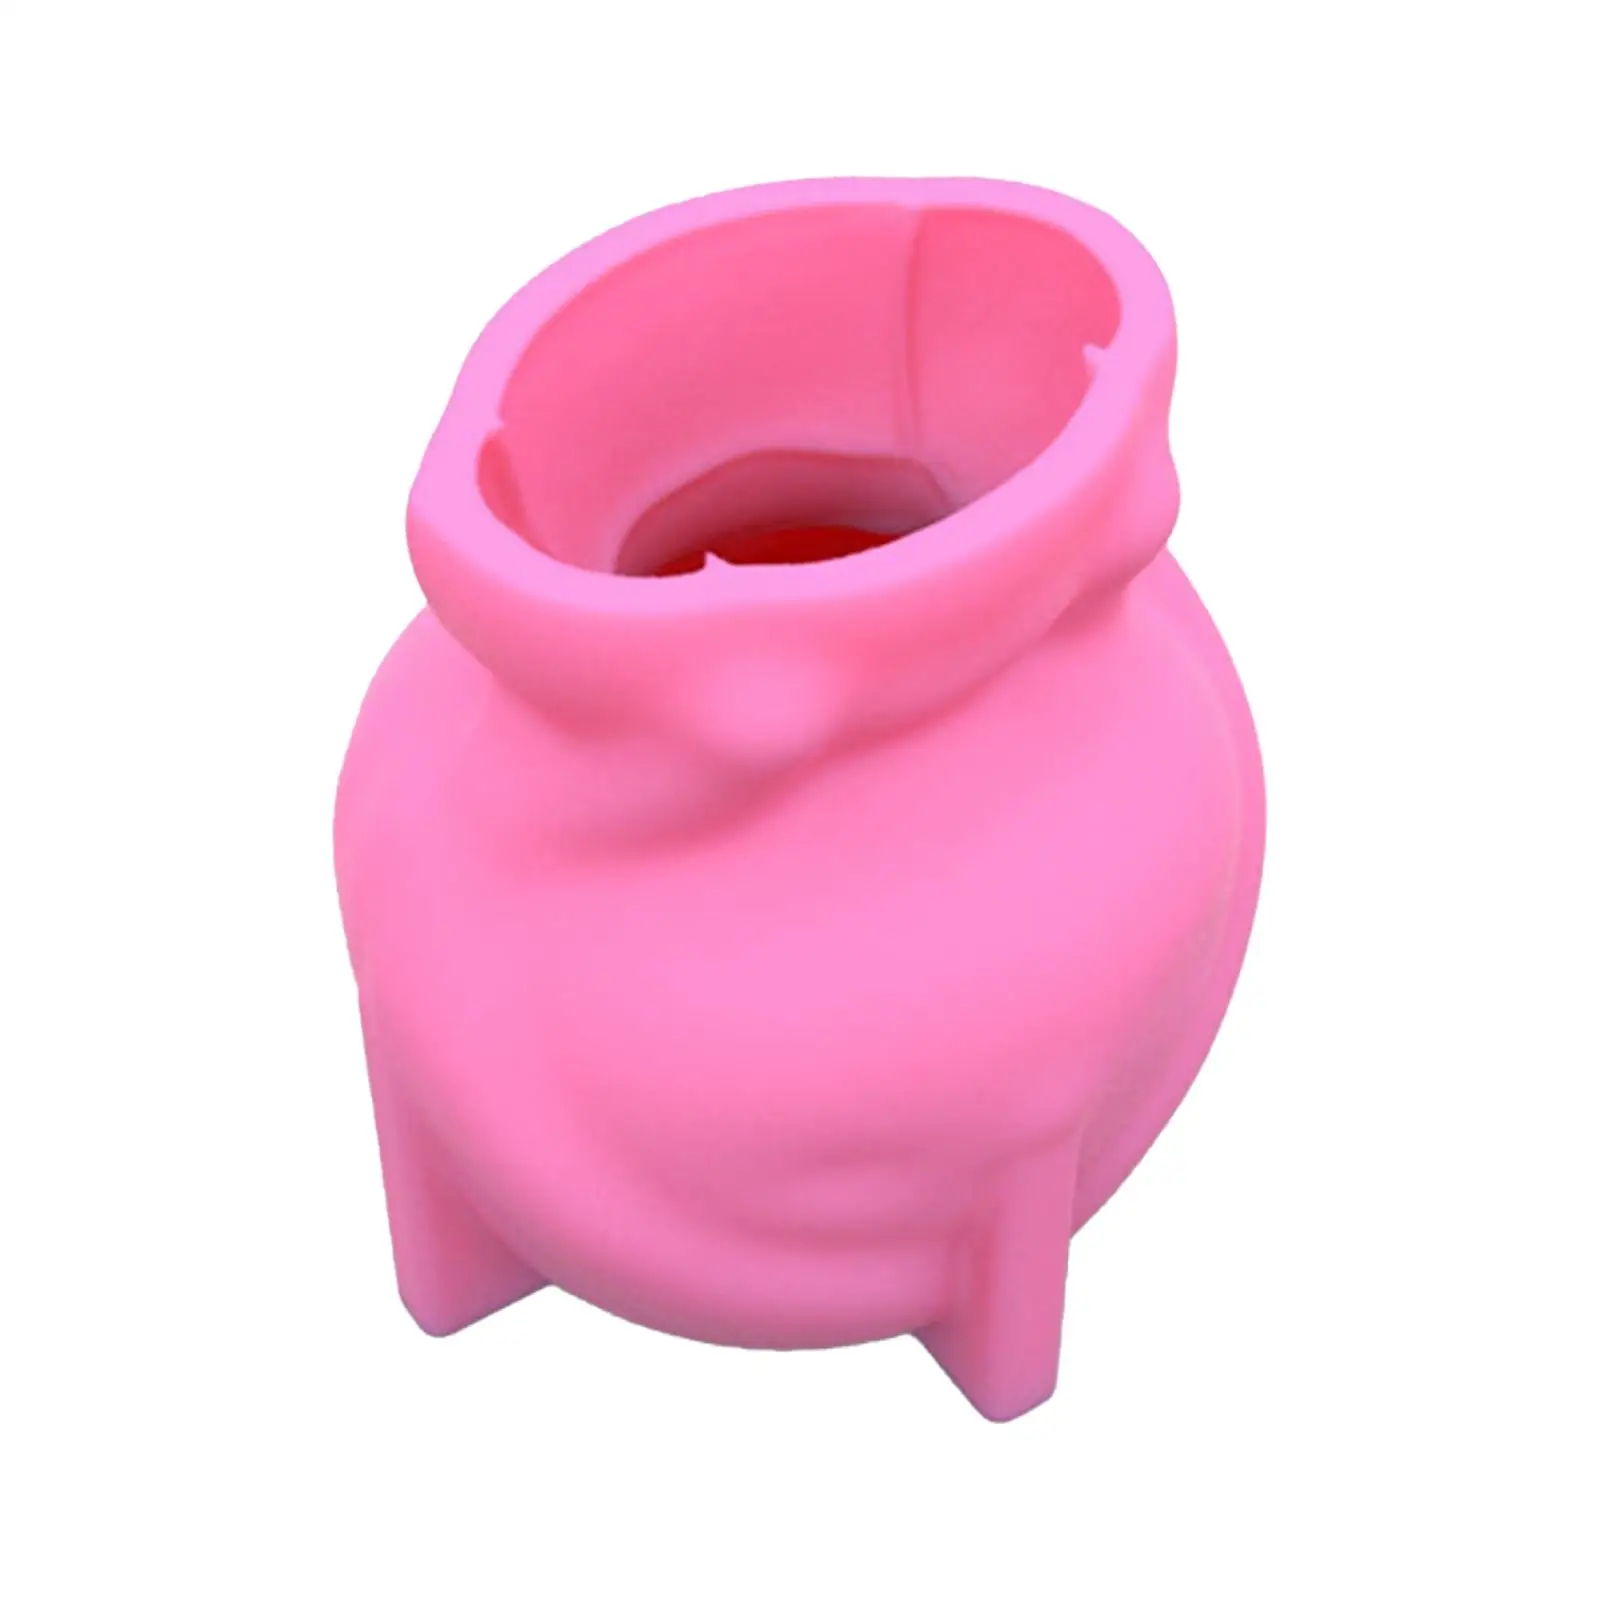 3D Silicone Vase Model Epoxy Resin Casting Flower Pot DIY Craft Project Polymer Clay Ornament Handmade Decoration Pen Holder